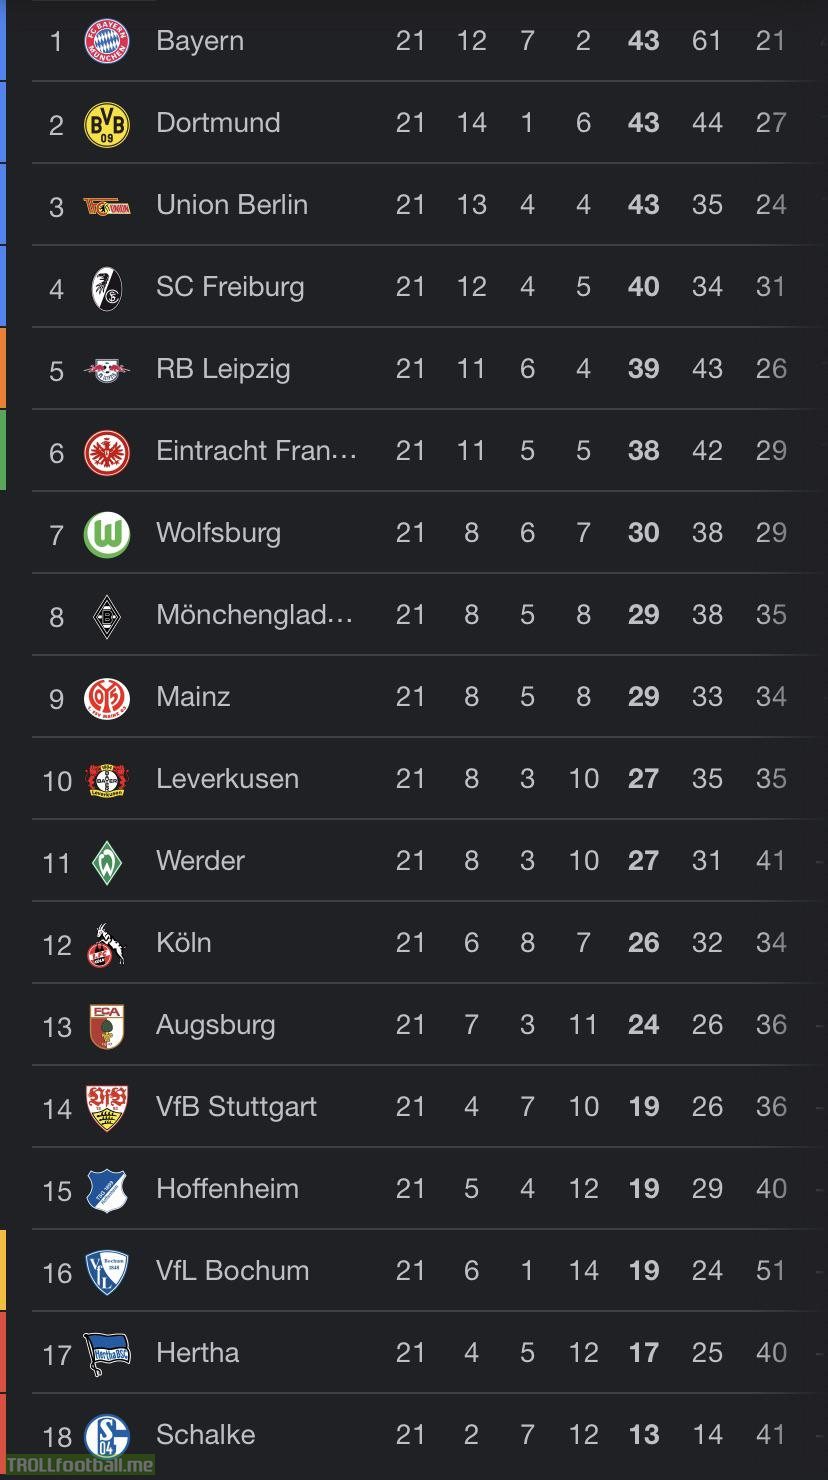 7 out of 18 teams - 39% of the Bundesliga are in the RO16 of CL/EL. No league had ever achieved this high percentage.